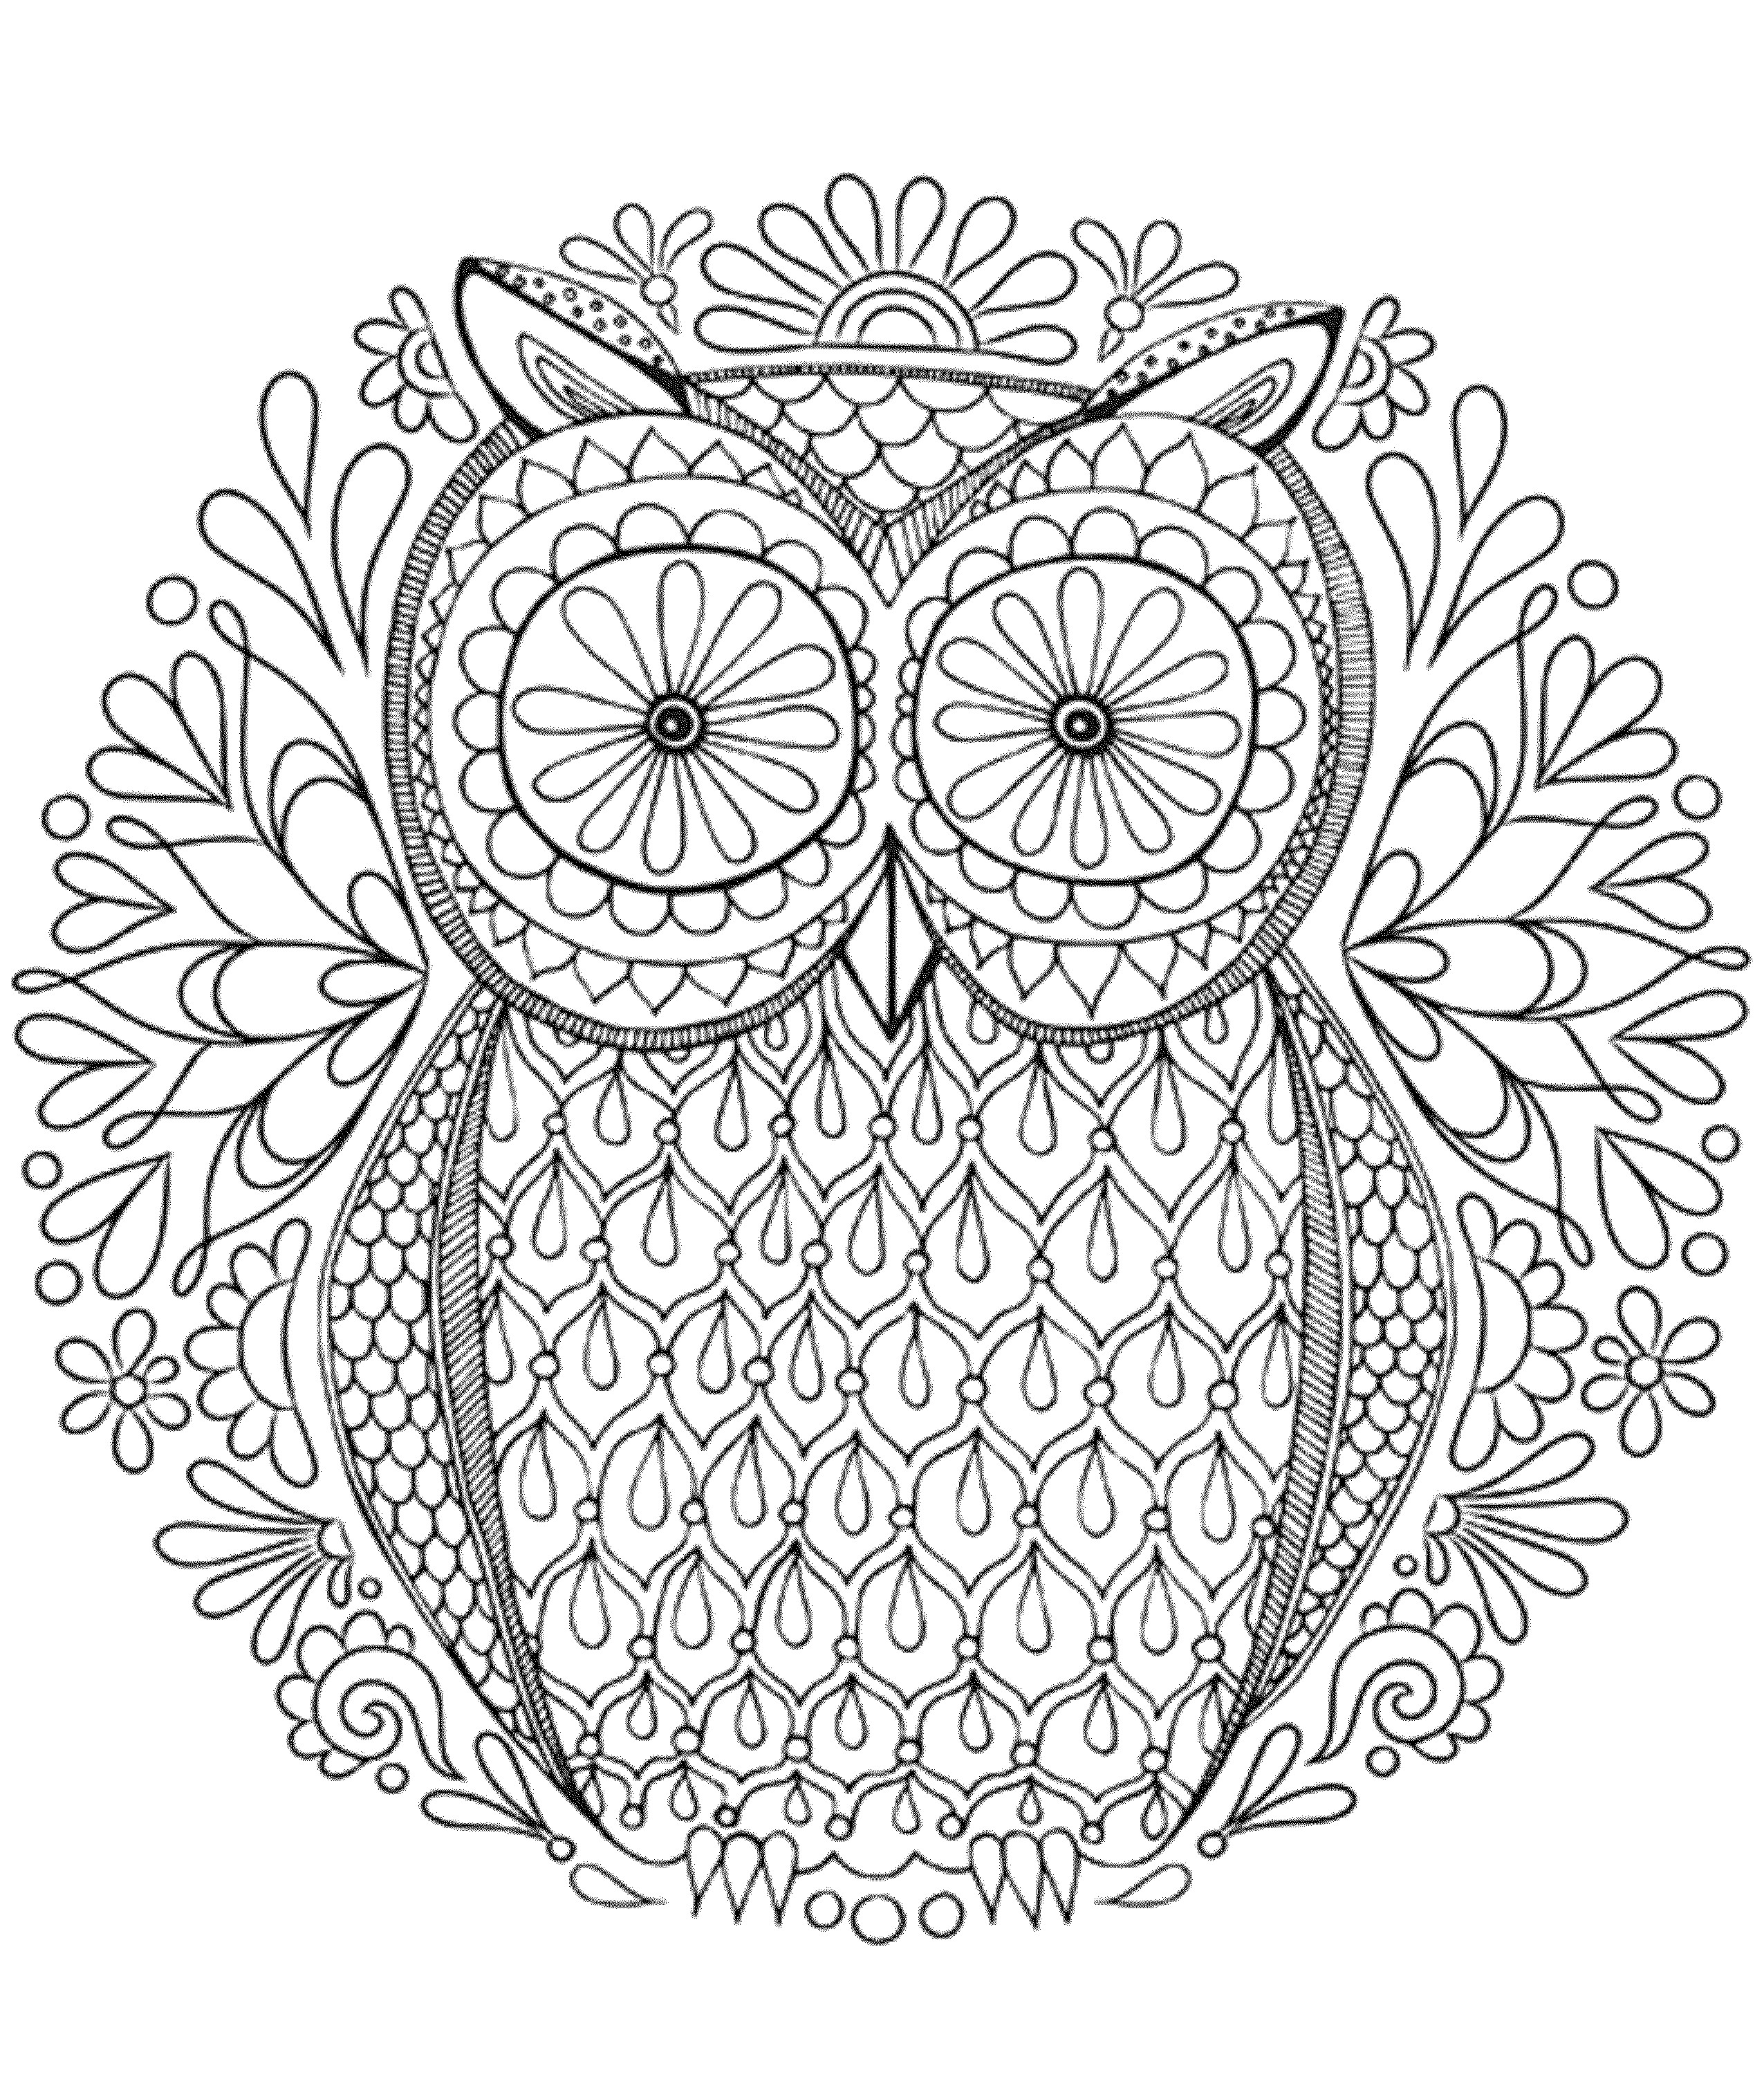 Hard Coloring Pages For Adults
 Hard Coloring Pages for Adults Best Coloring Pages For Kids